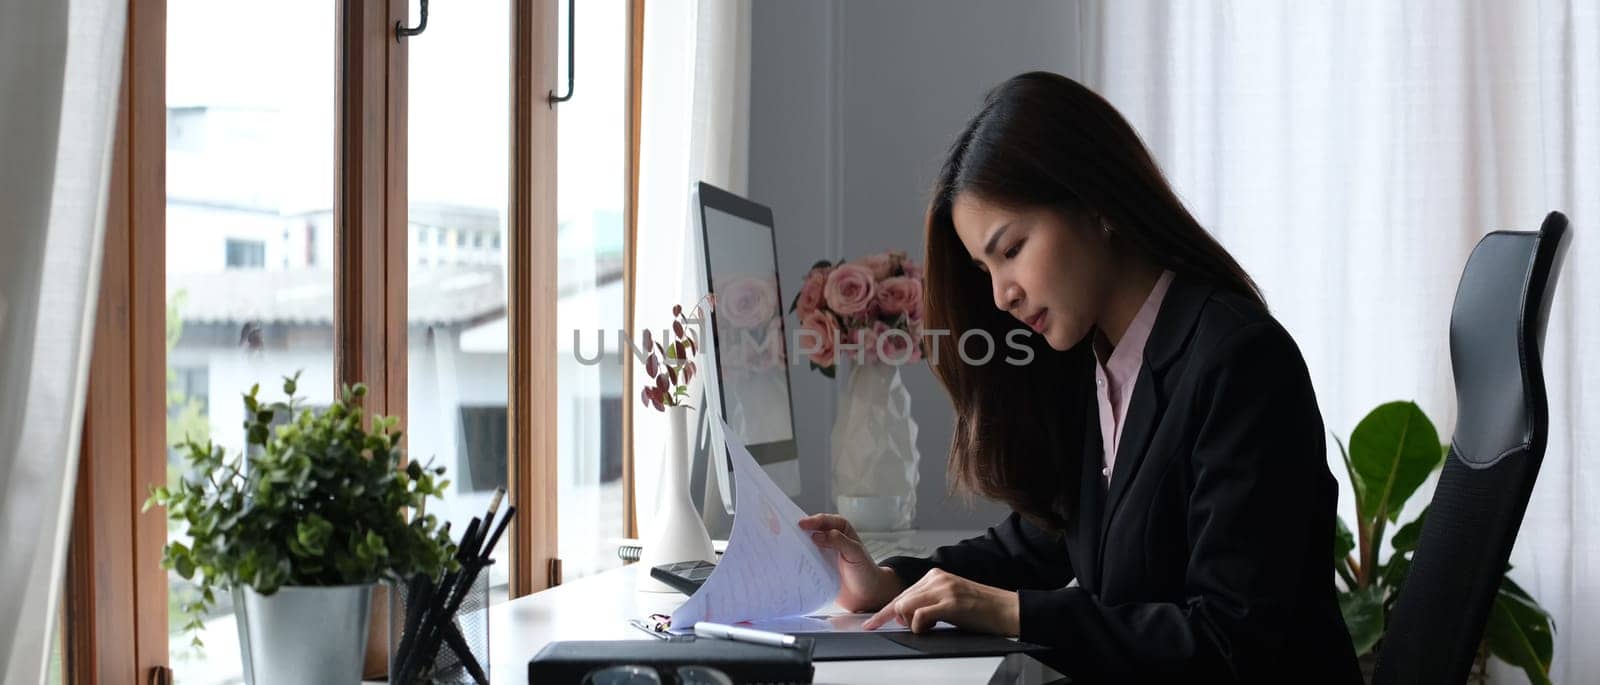 Serious female accountant comparing corporate income for previous year with current one at her workstation.